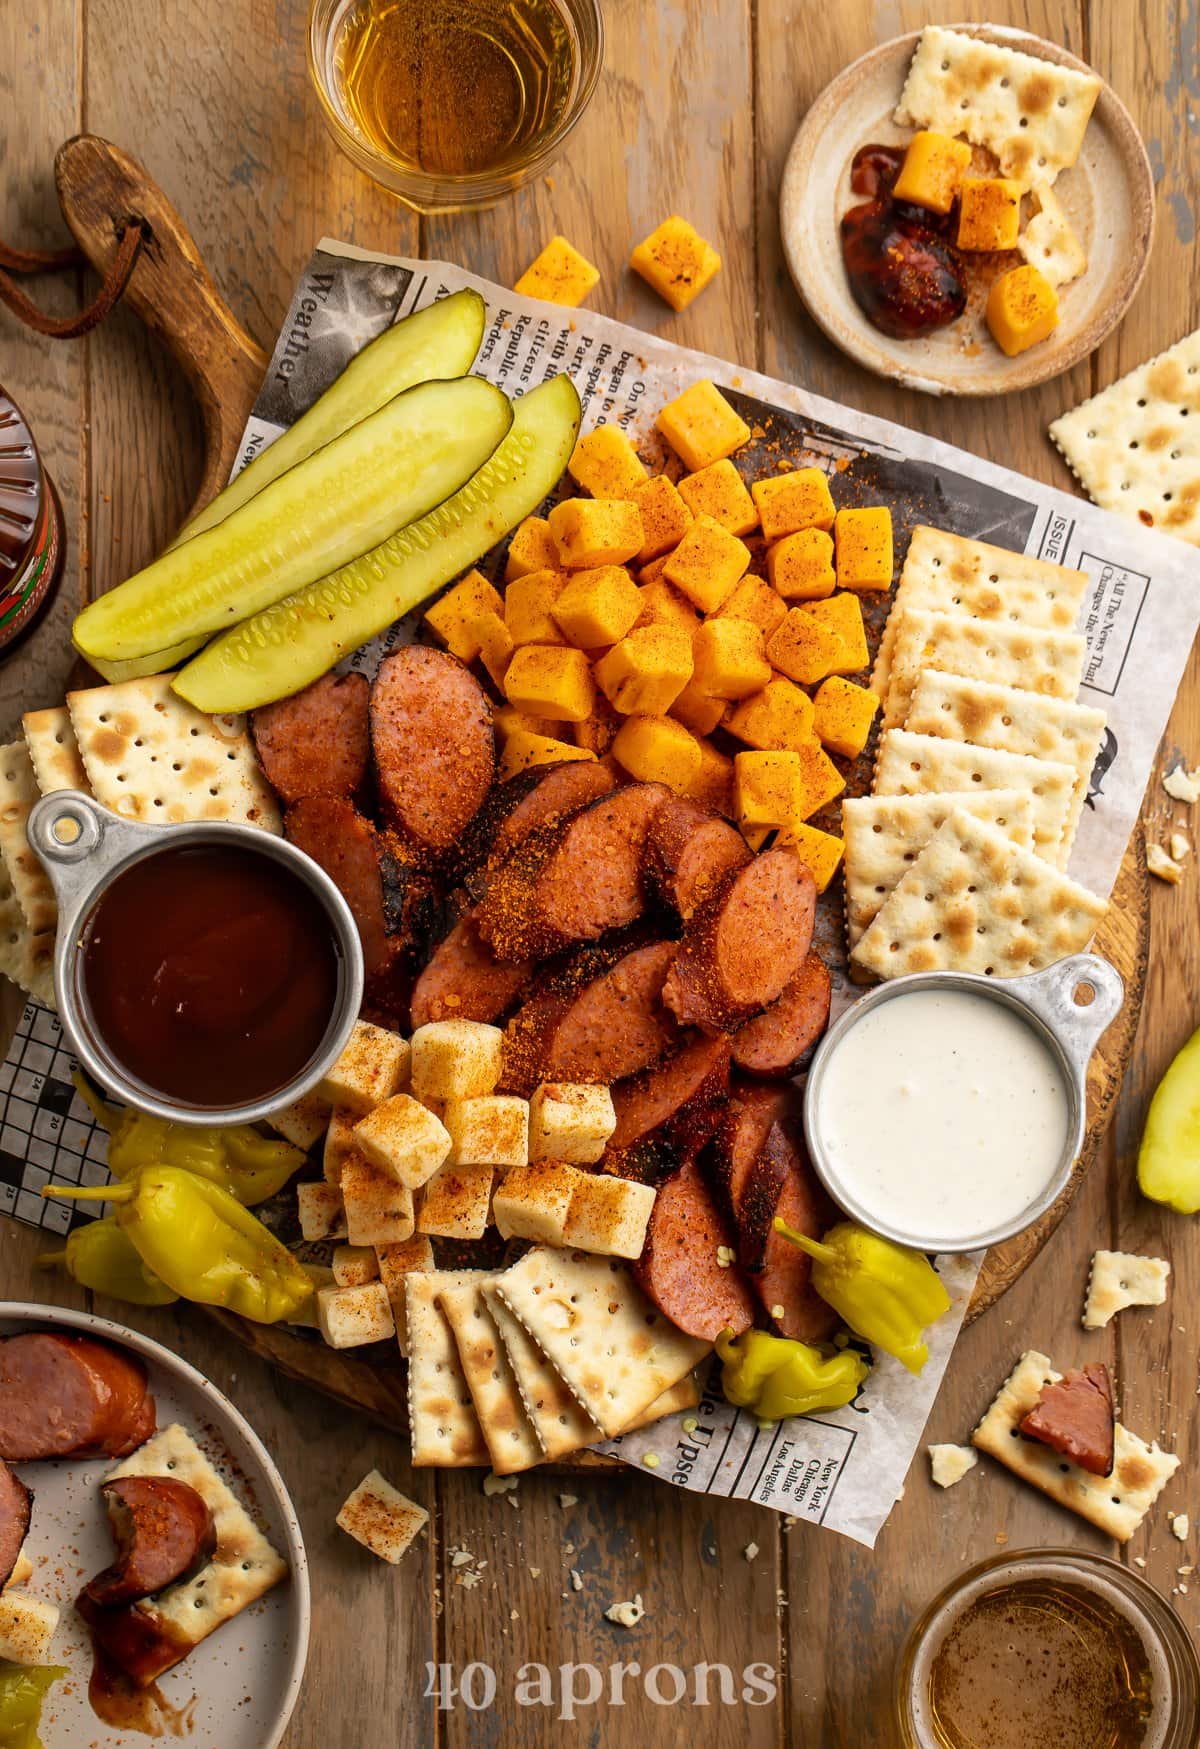 Overhead view of a Memphis-style cheese and sausage plate with pickles and crackers.